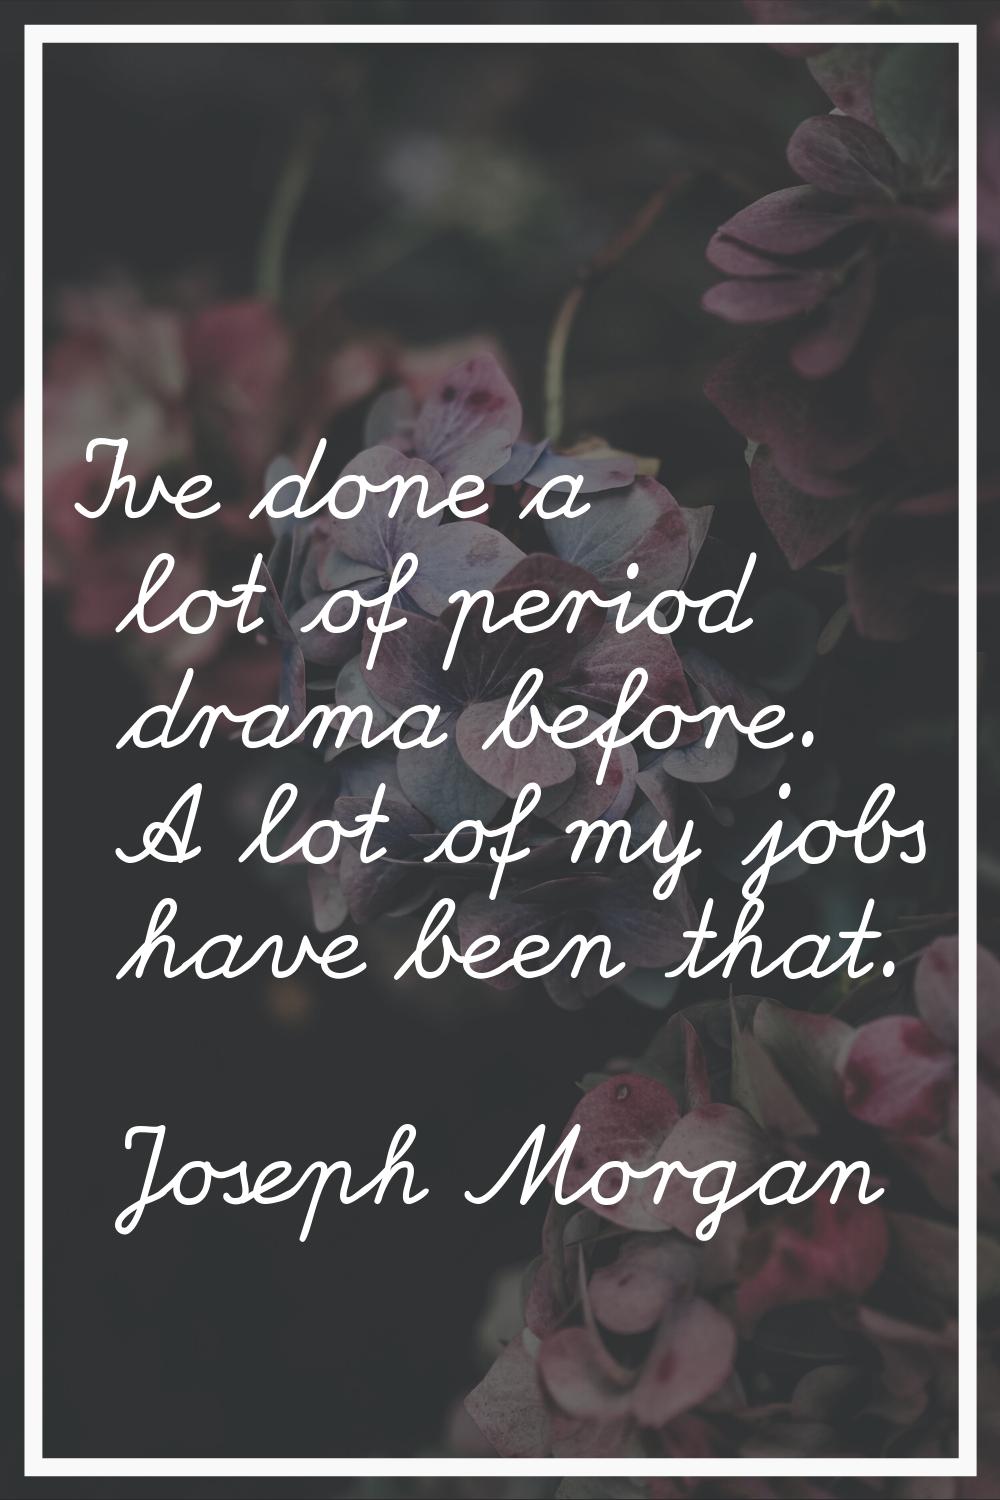 I've done a lot of period drama before. A lot of my jobs have been that.